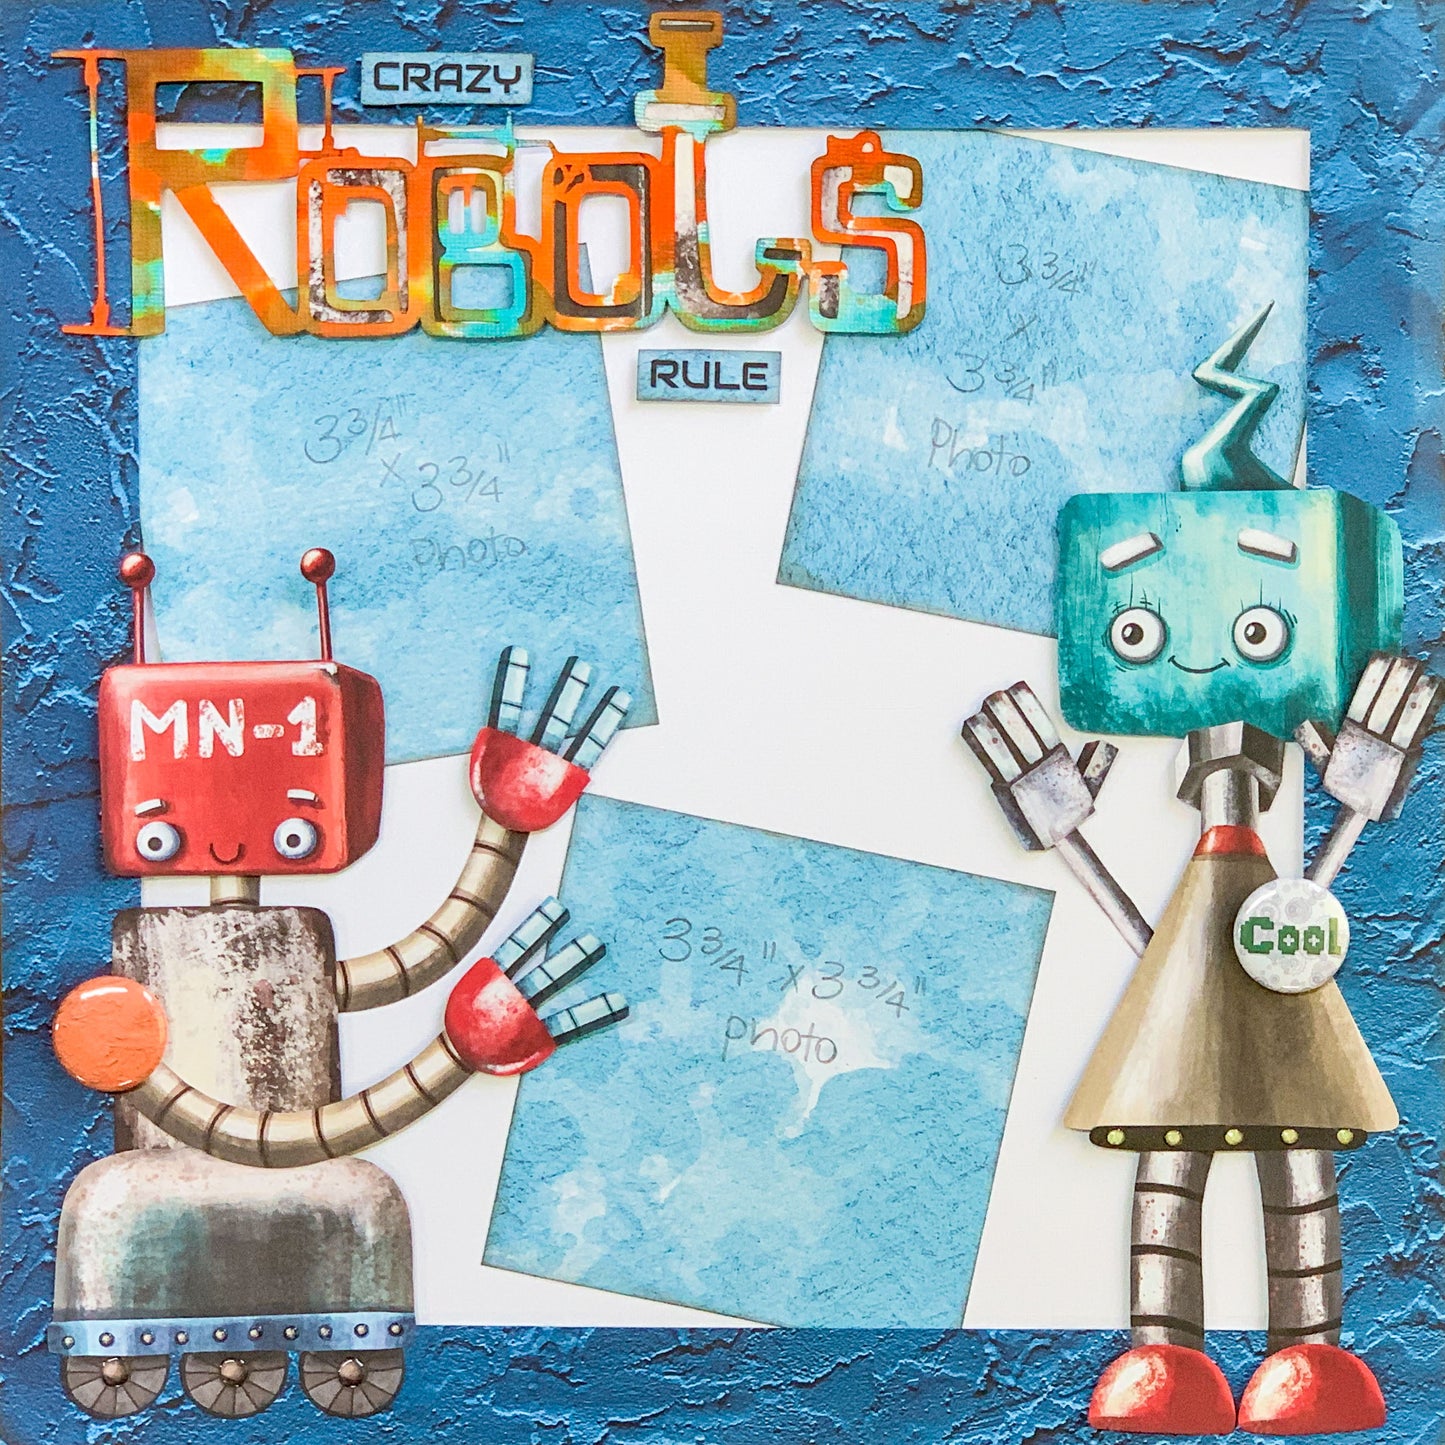 Robot Antics 12x12 Double-Sided Patterned Paper 5